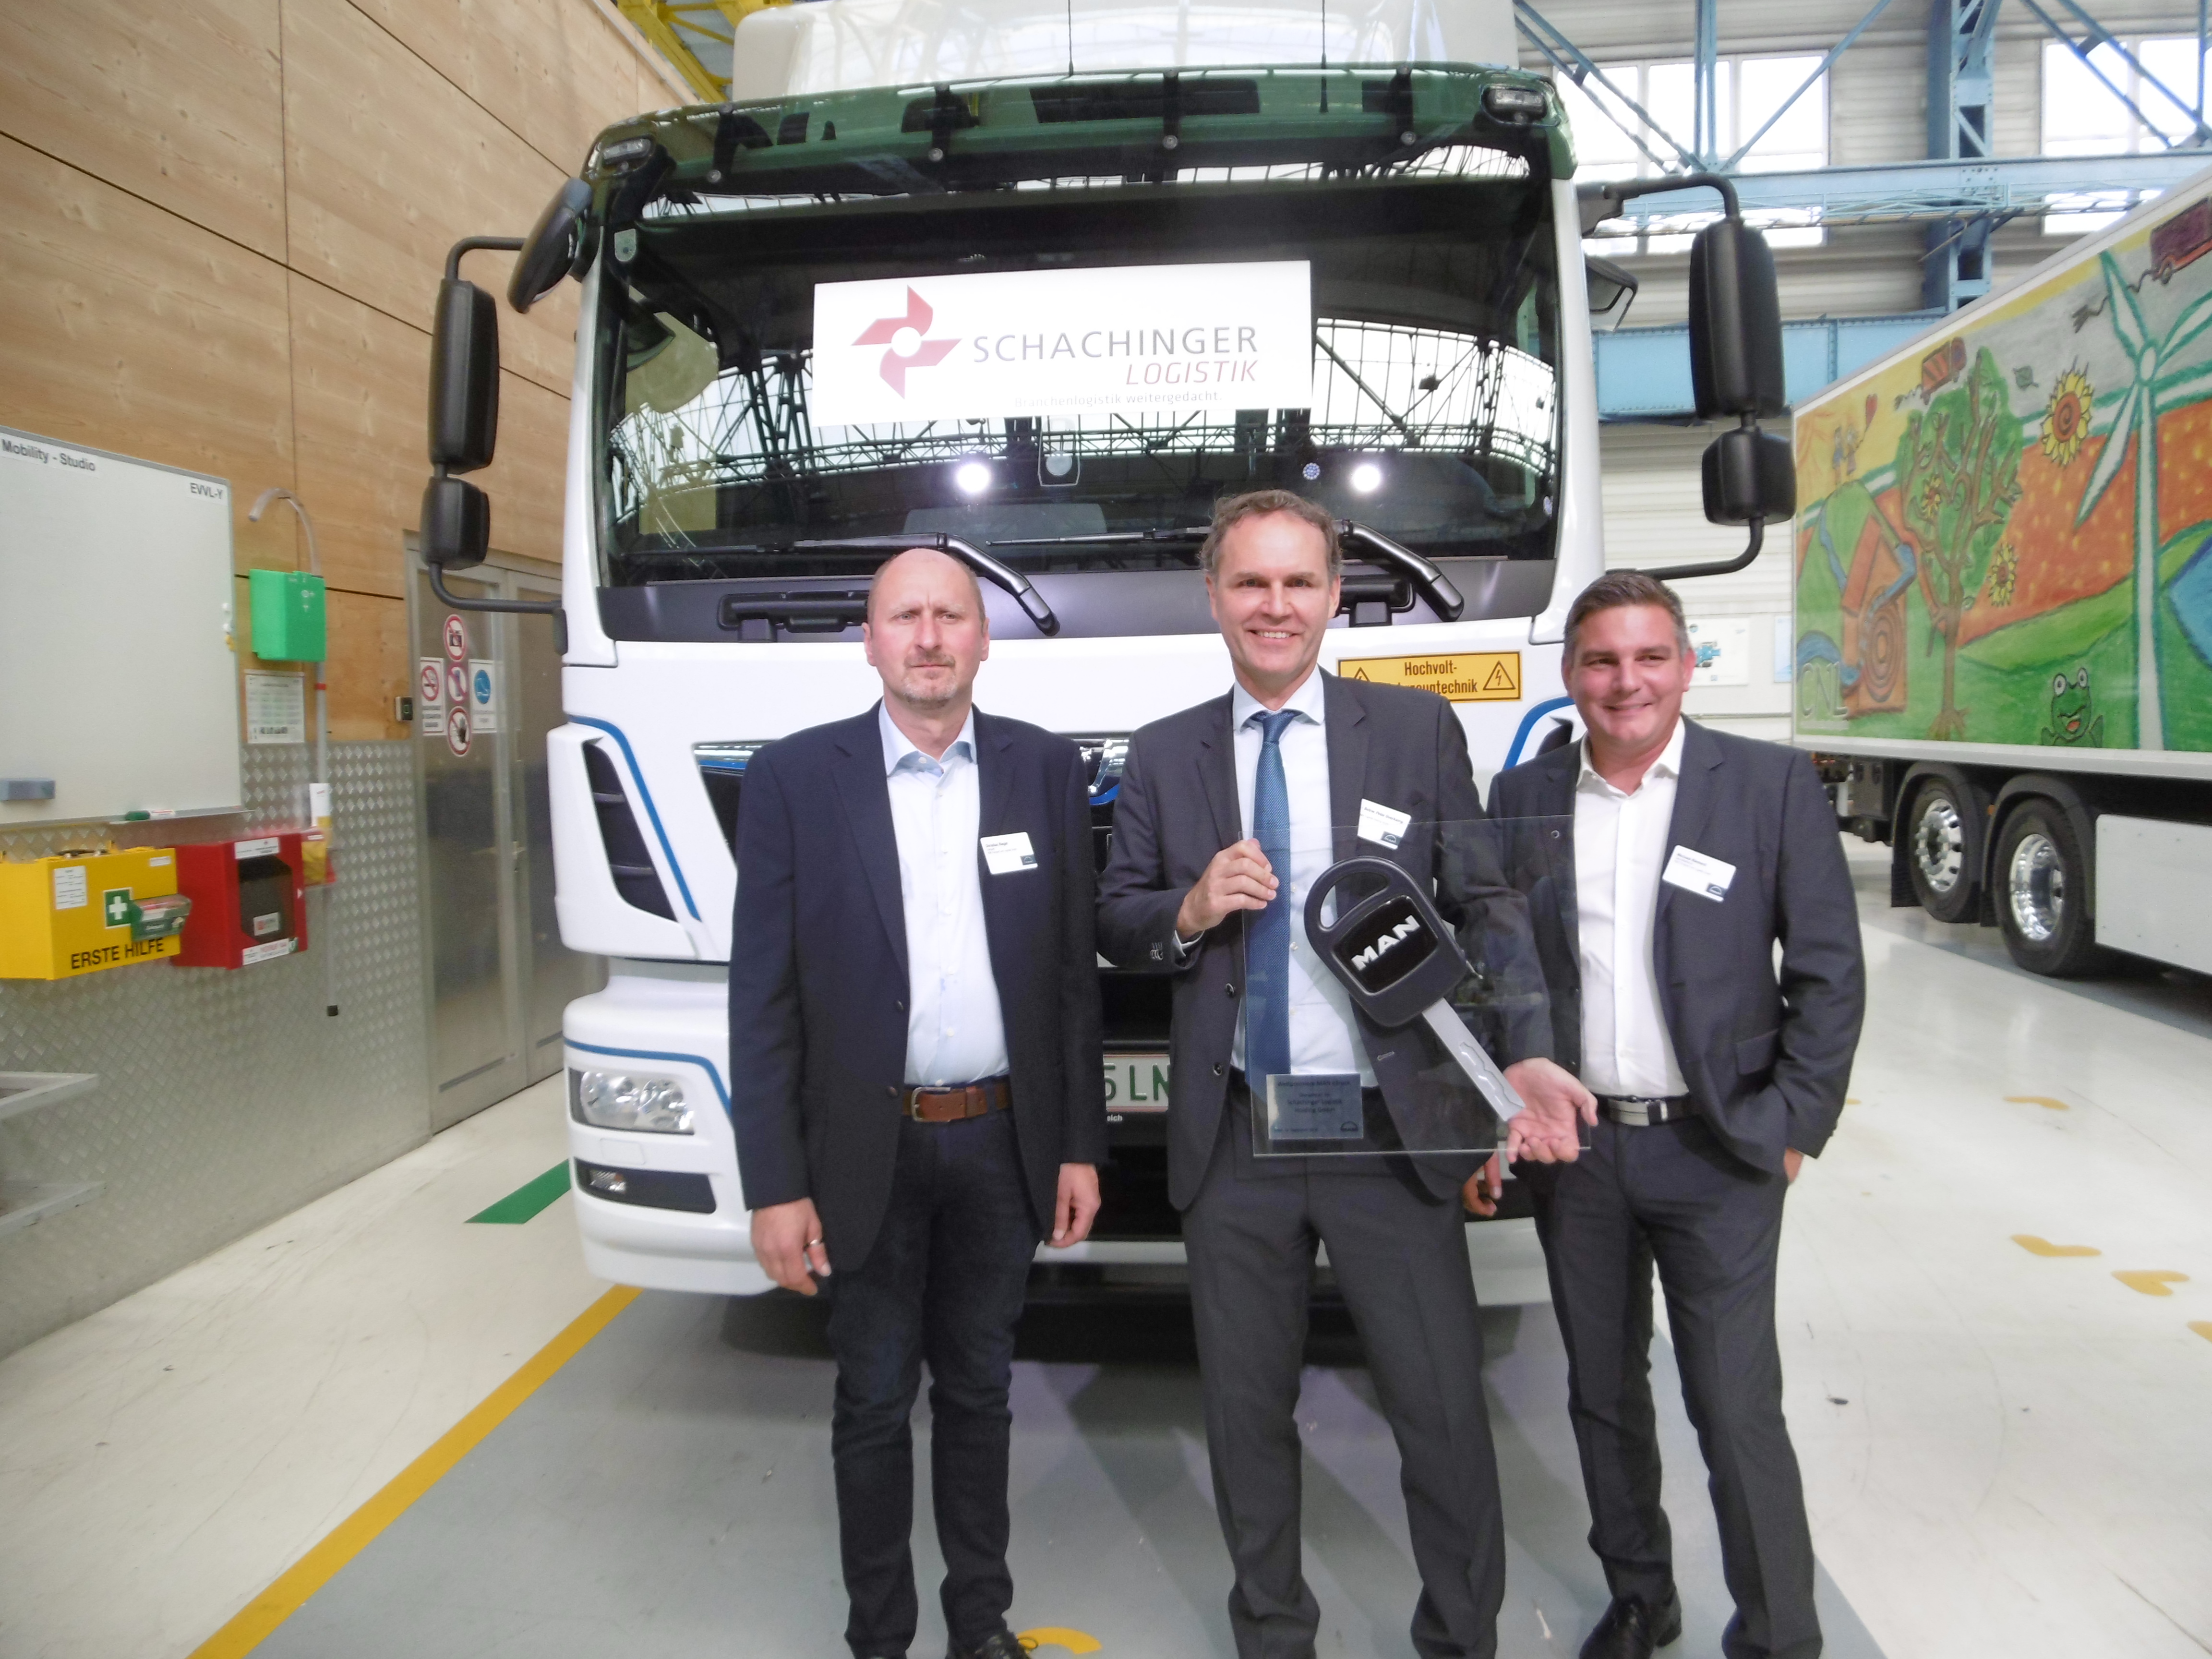 Schachinger Logistik remains committed to sustainability